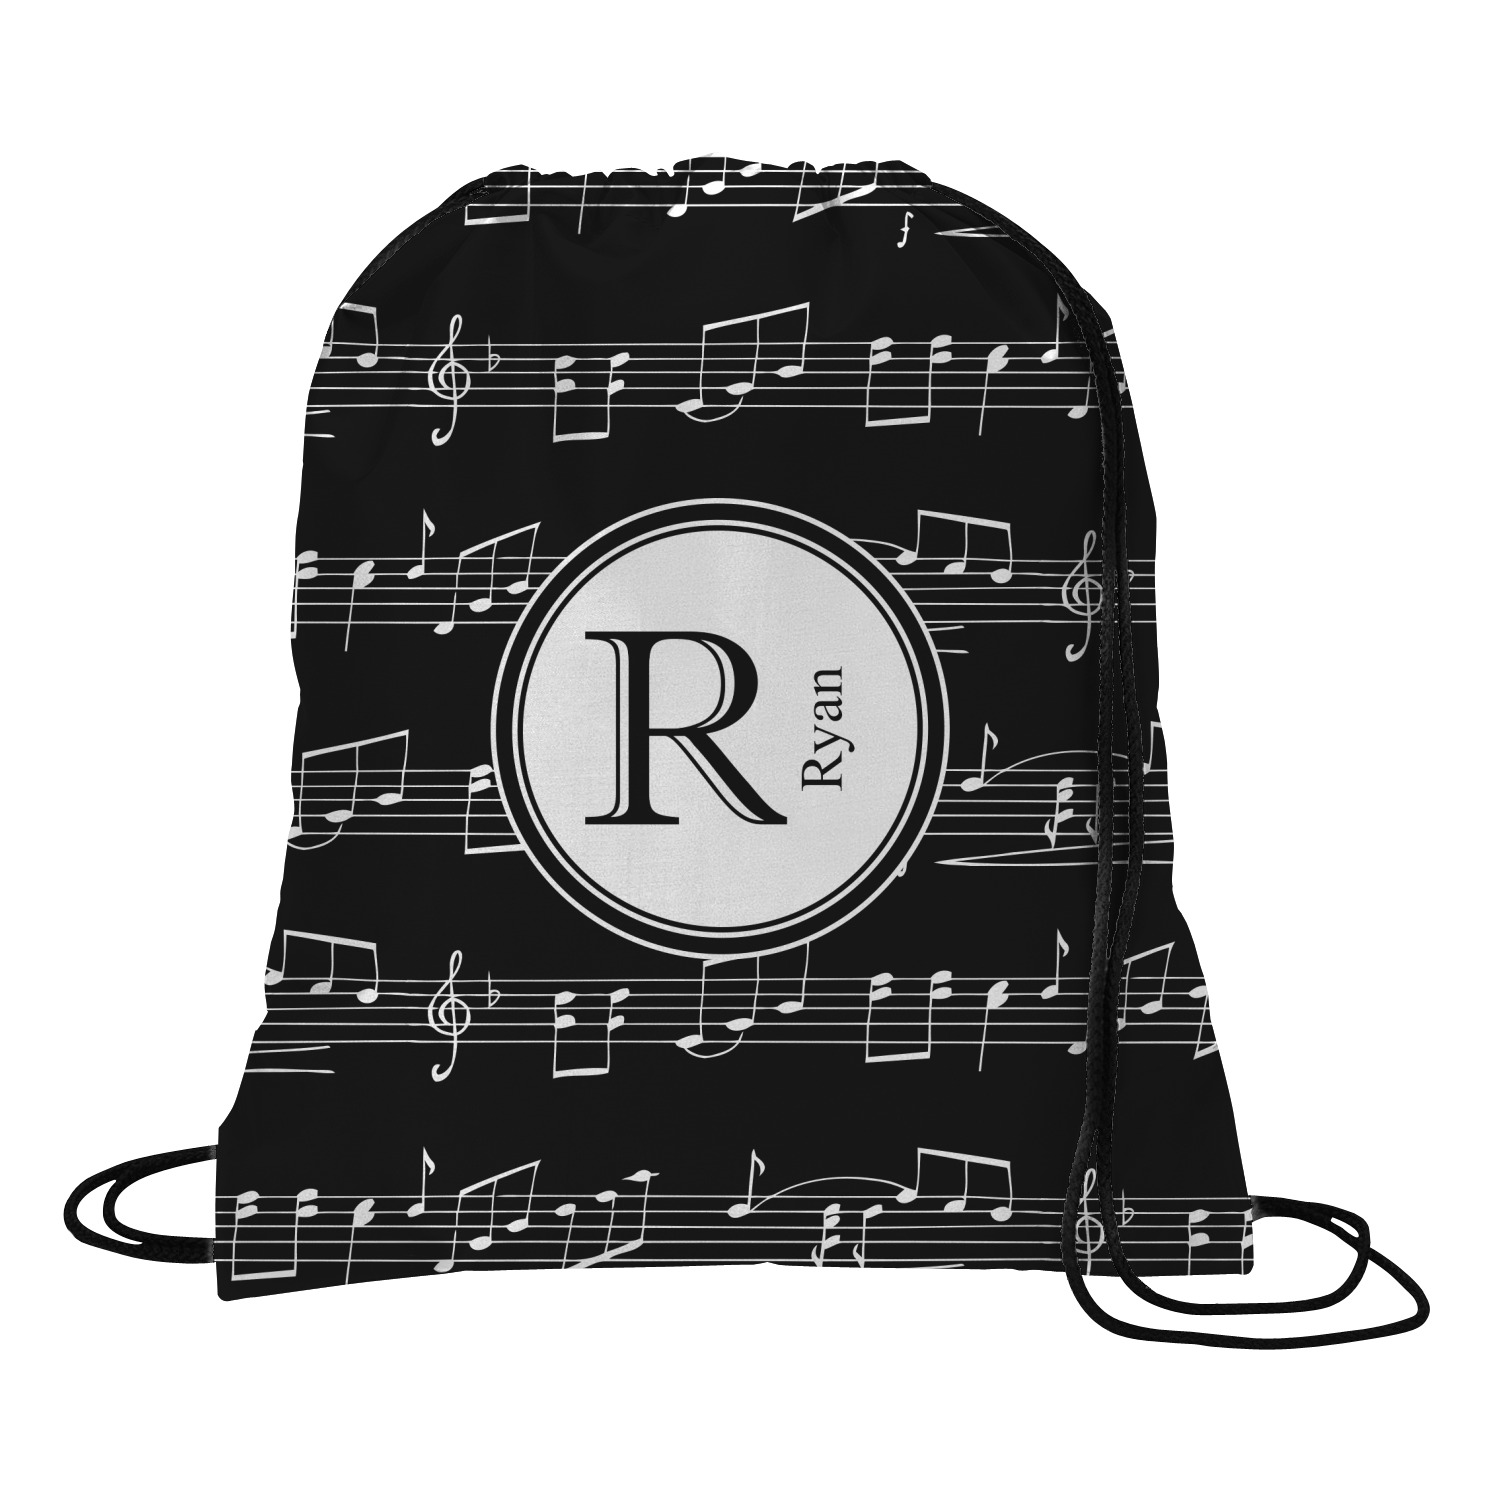 63 Different Genres of Music Black Cotton Drawstring Backpack Graphic